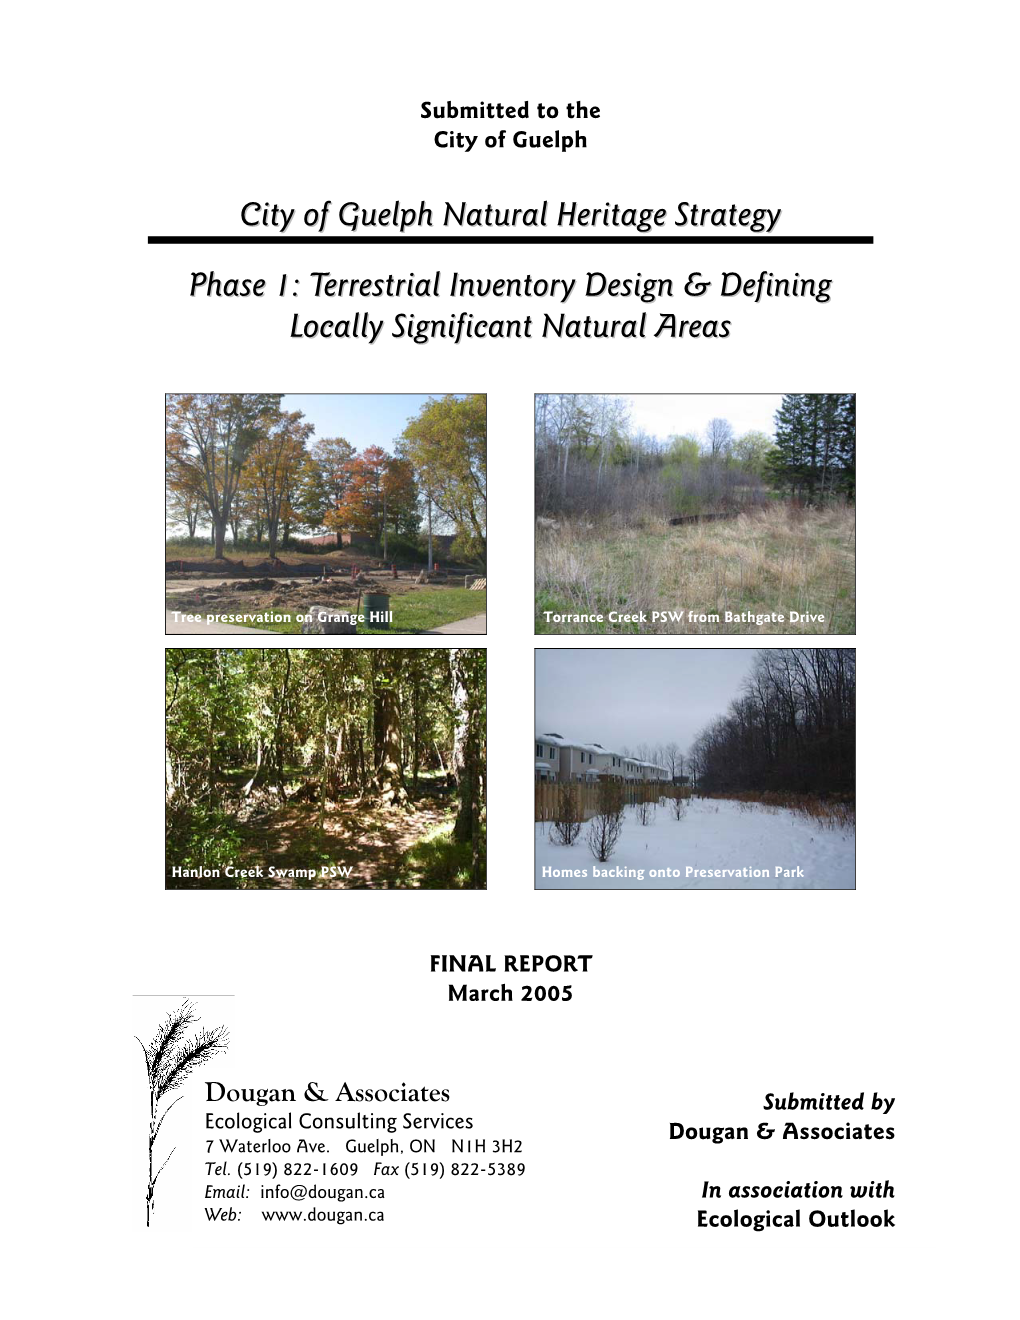 Natural Heritage Strategy Phase 1 Report